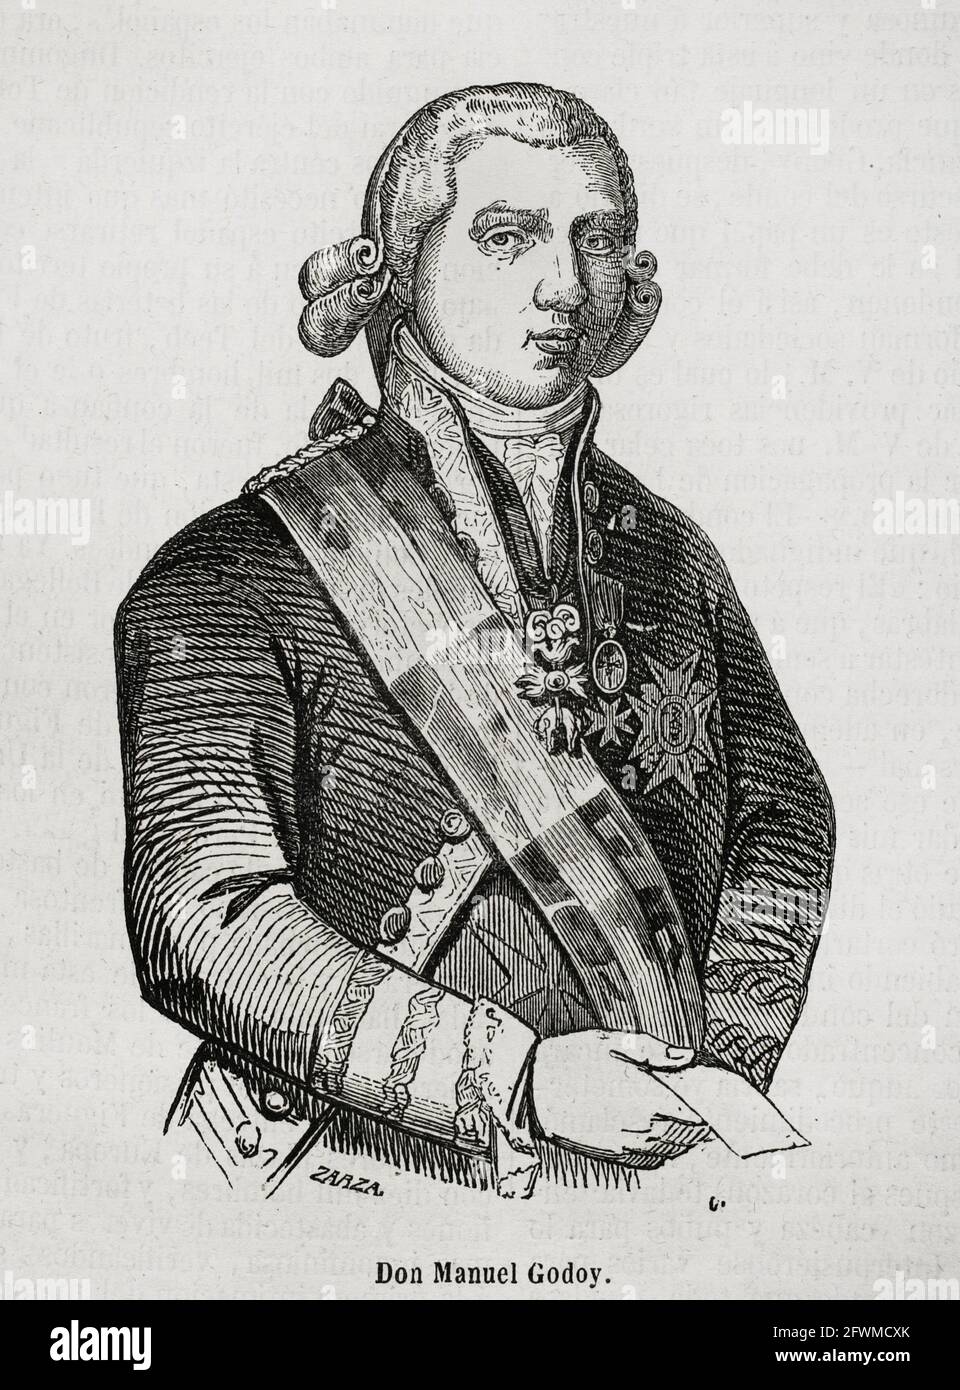 Manuel de Godoy y Alvarez de Faria (1767-1851). Spanish politician. First Secretary of State of Spain from 1792 to 1797. 'Prince of Peace' and favourite of Charles IV and Queen Maria Luisa. Illustration by Zarza. Portrait. Engraving. Historia General de España by Father Mariana. Madrid, 1853. Stock Photo